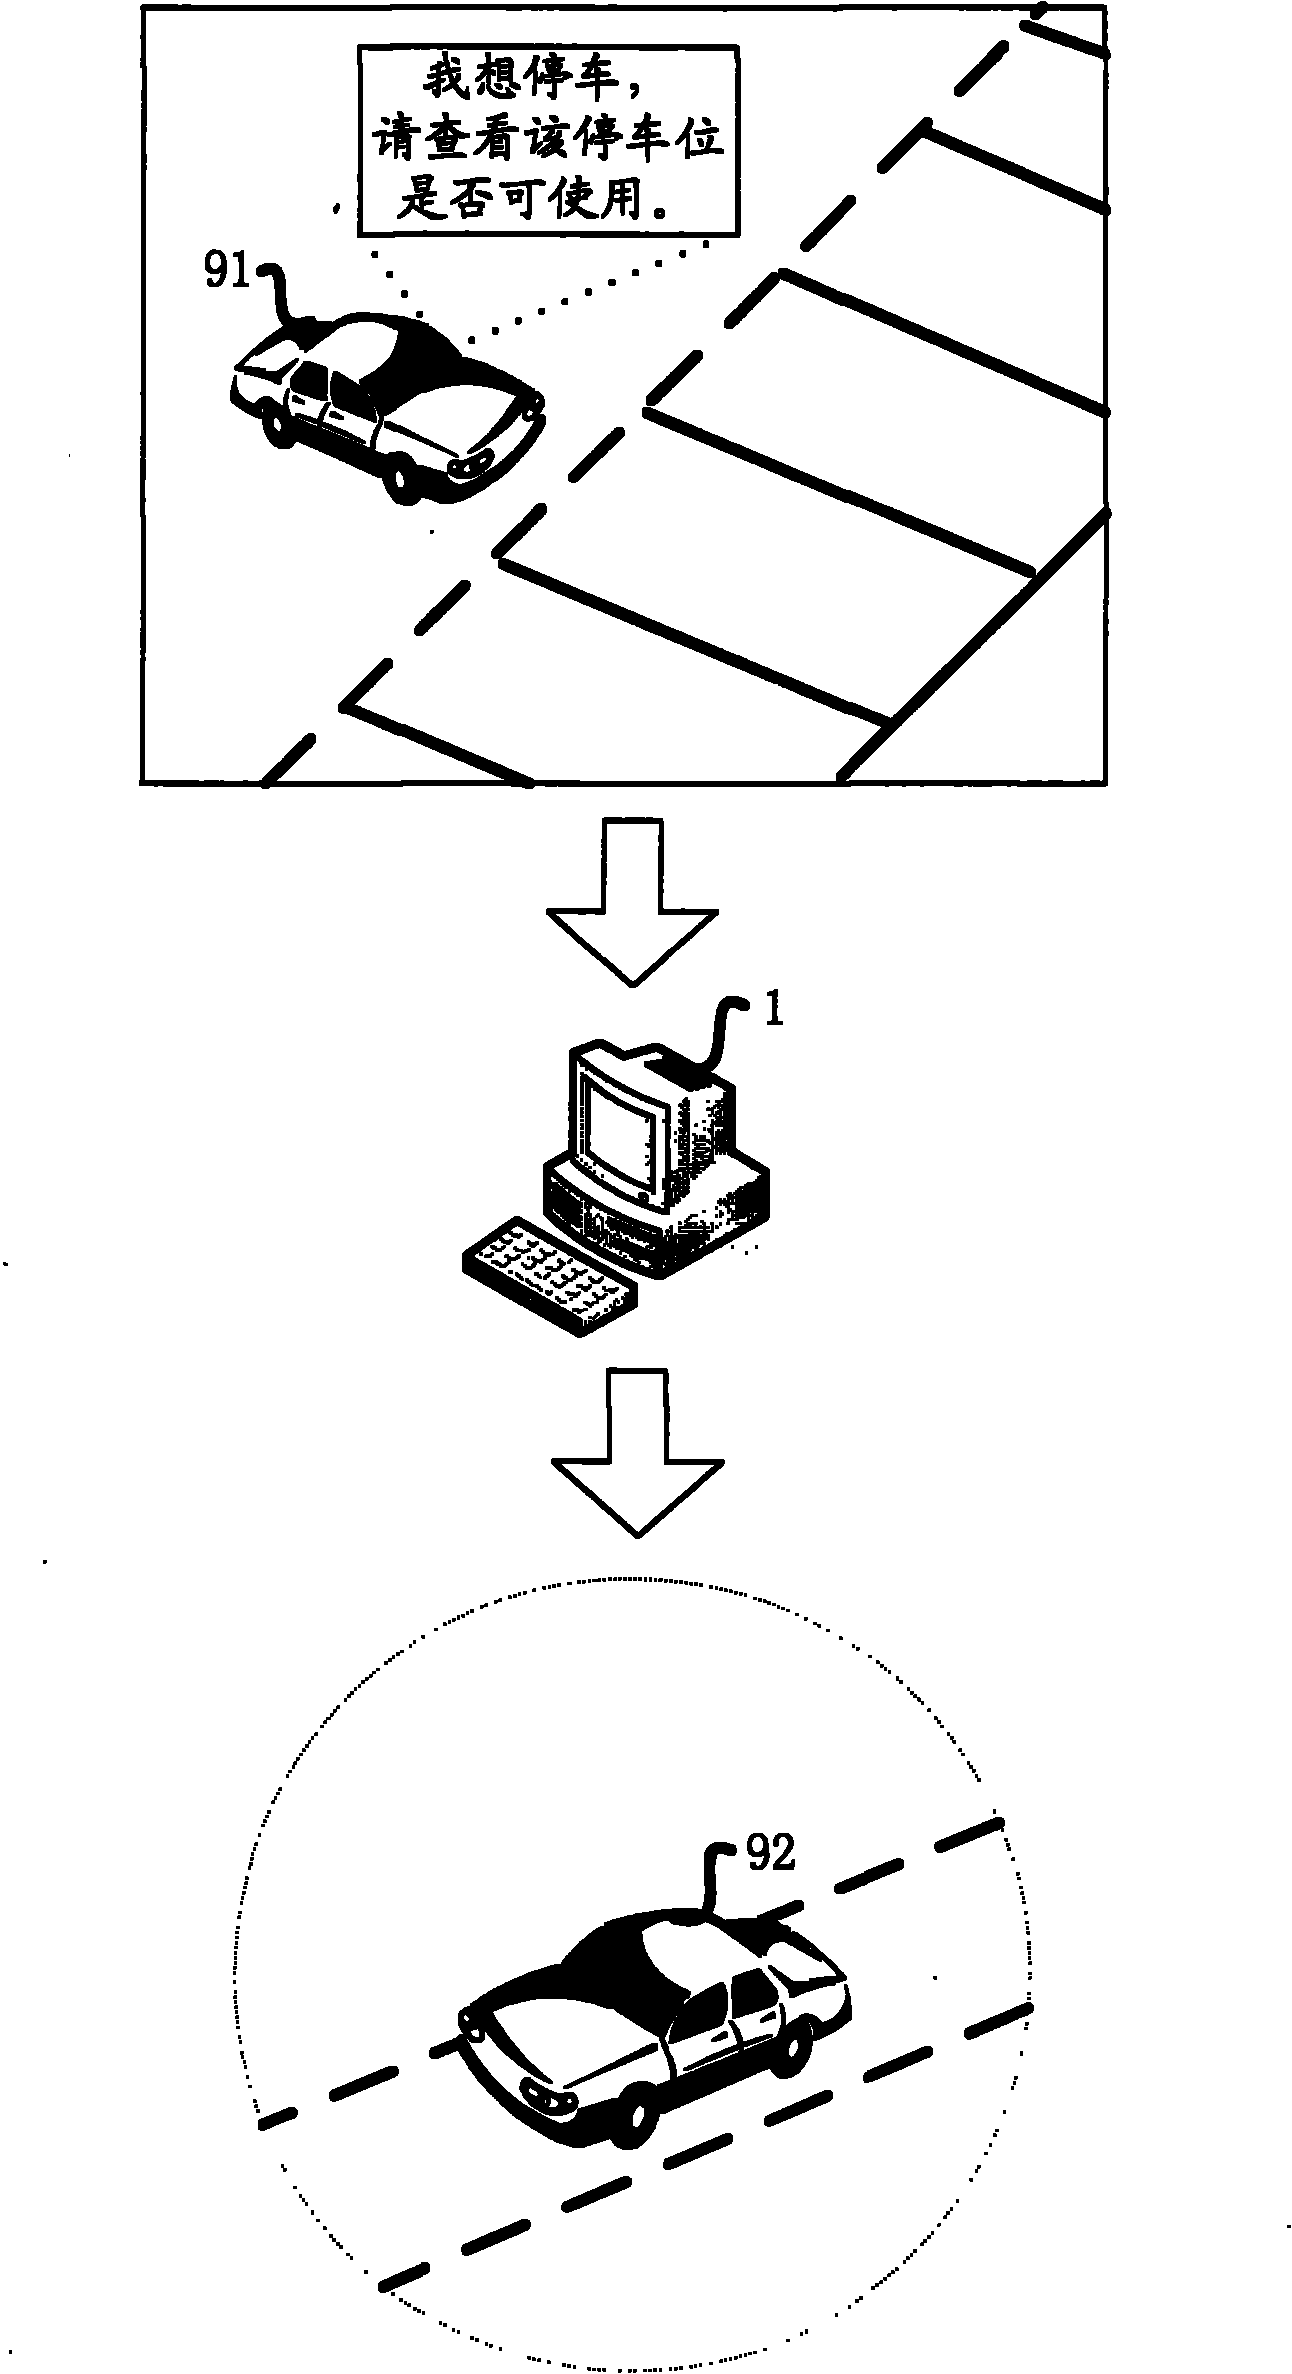 Control device and control method for indicating parking spaces in intelligent traffic system